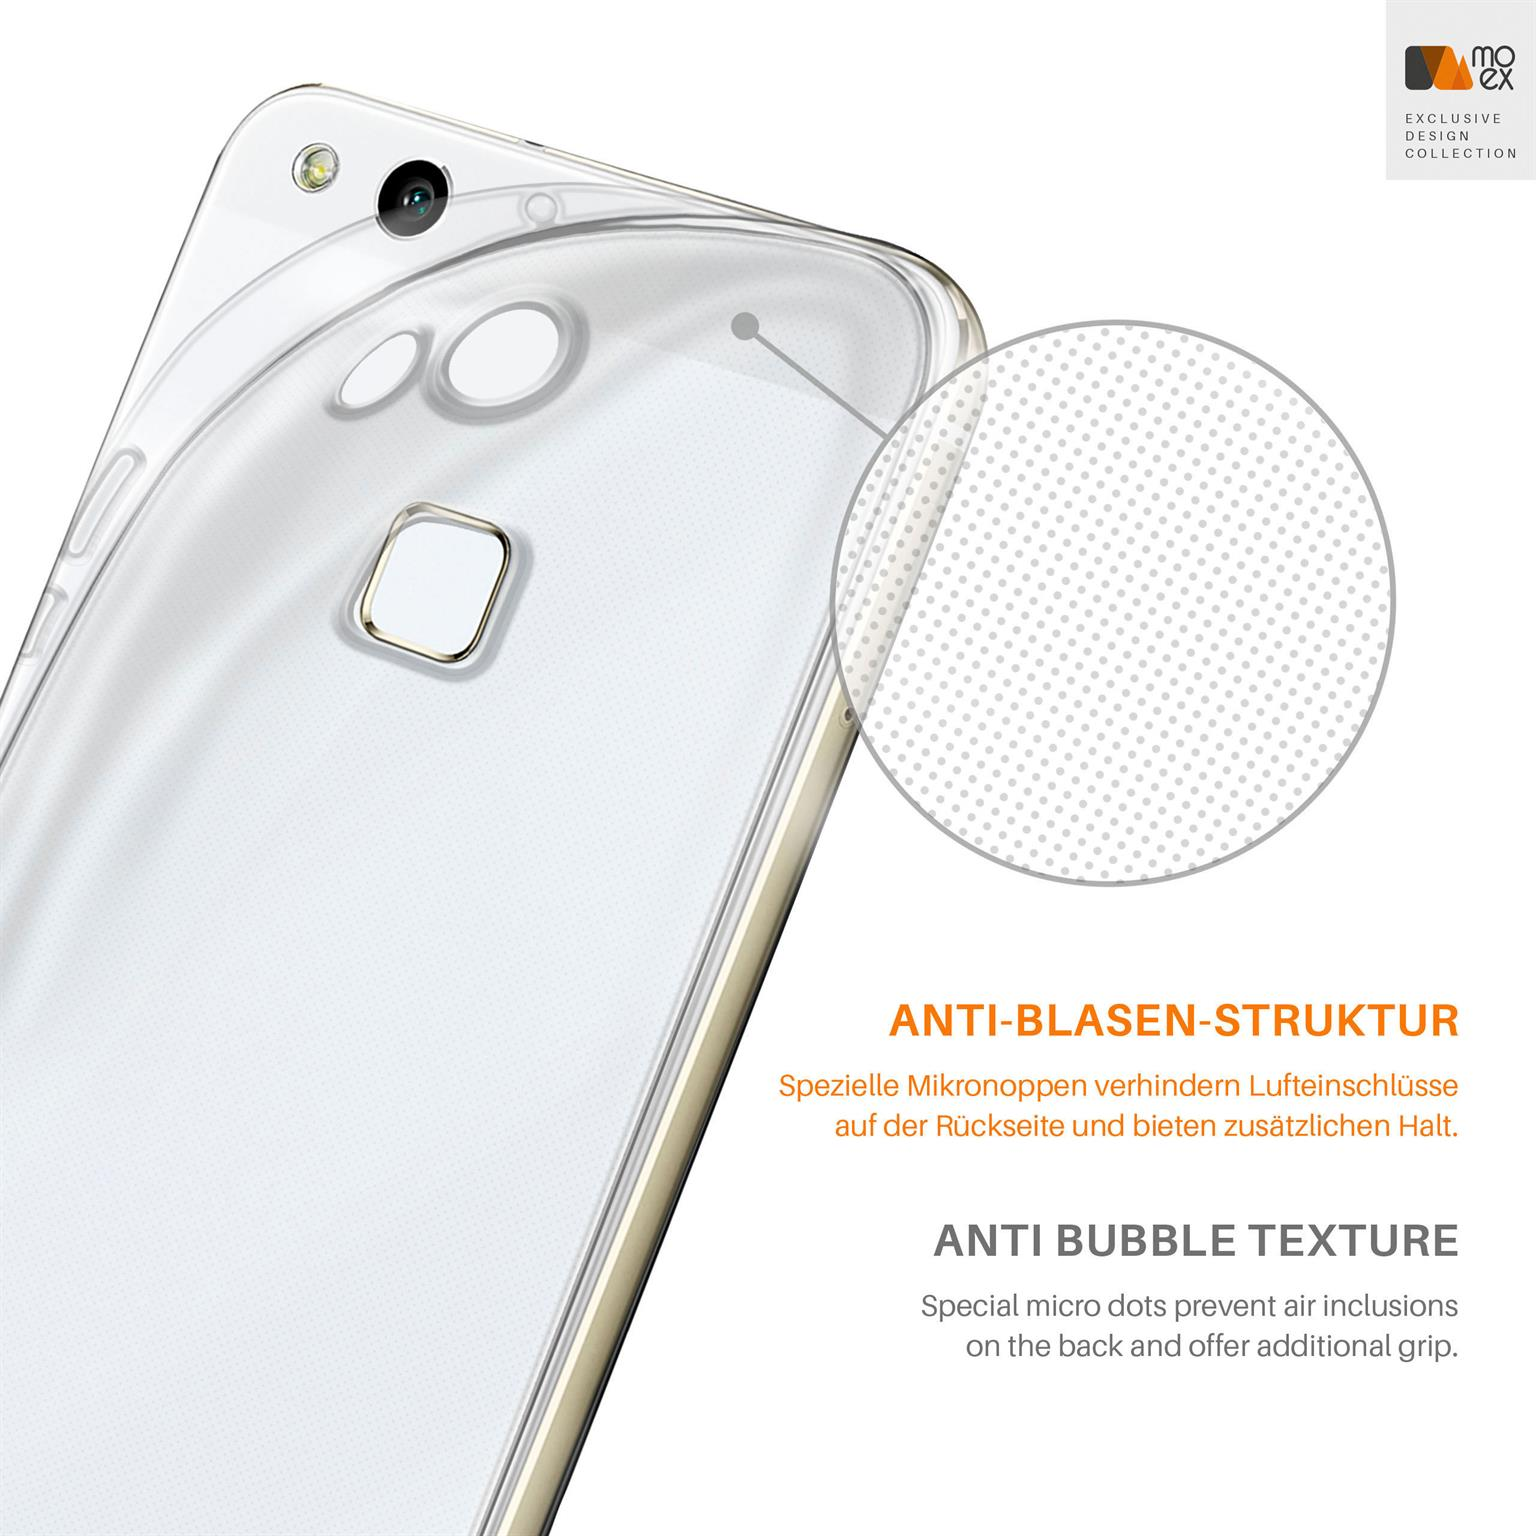 Backcover, MOEX Huawei, Lite, Crystal-Clear Case, Aero P10